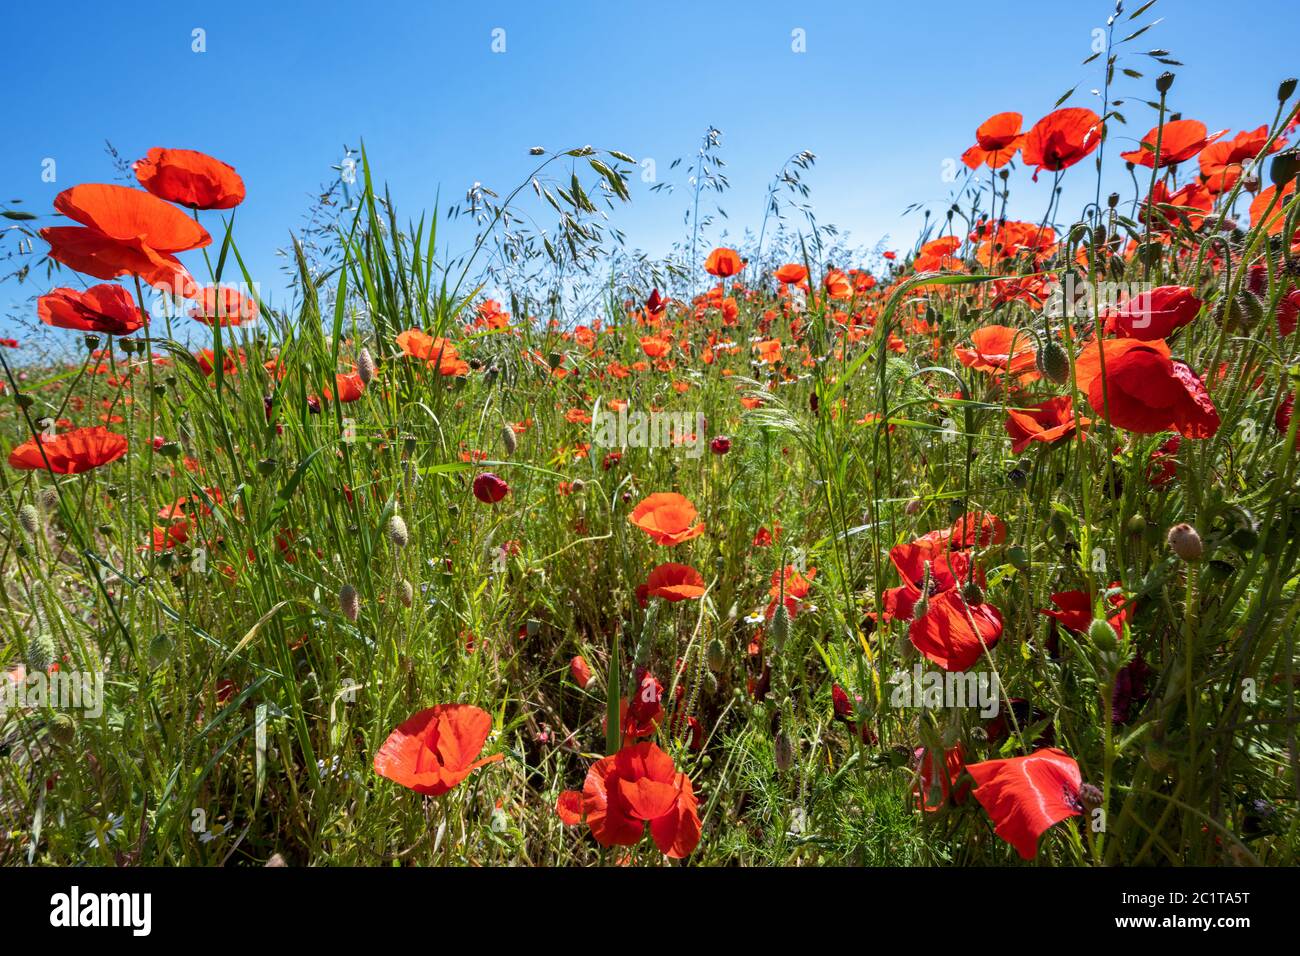 Red flowers of Corn poppy (Papaver rhoeas) and grass varieties on a field against a blue sky on a sunny summer day, copy space, selected focus, narrow Stock Photo